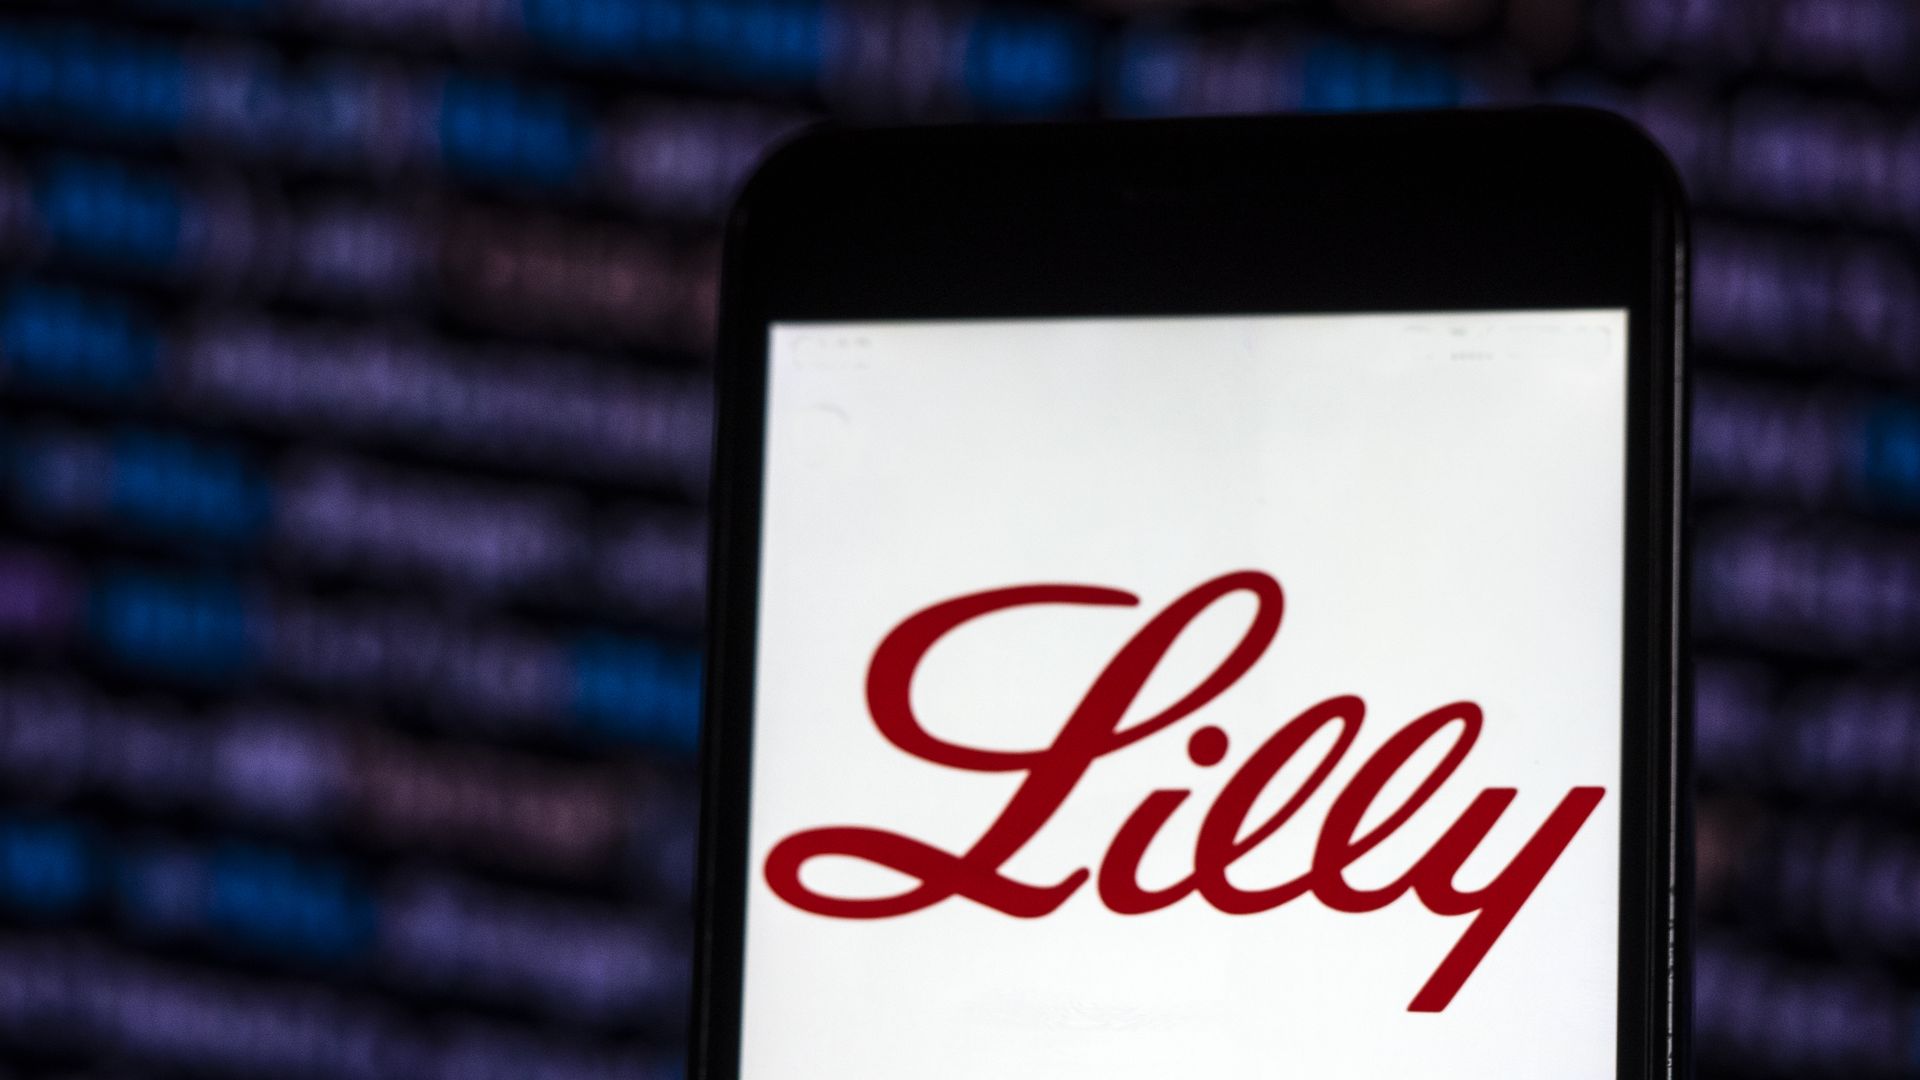 Eli Lilly's logo on a phone screen.